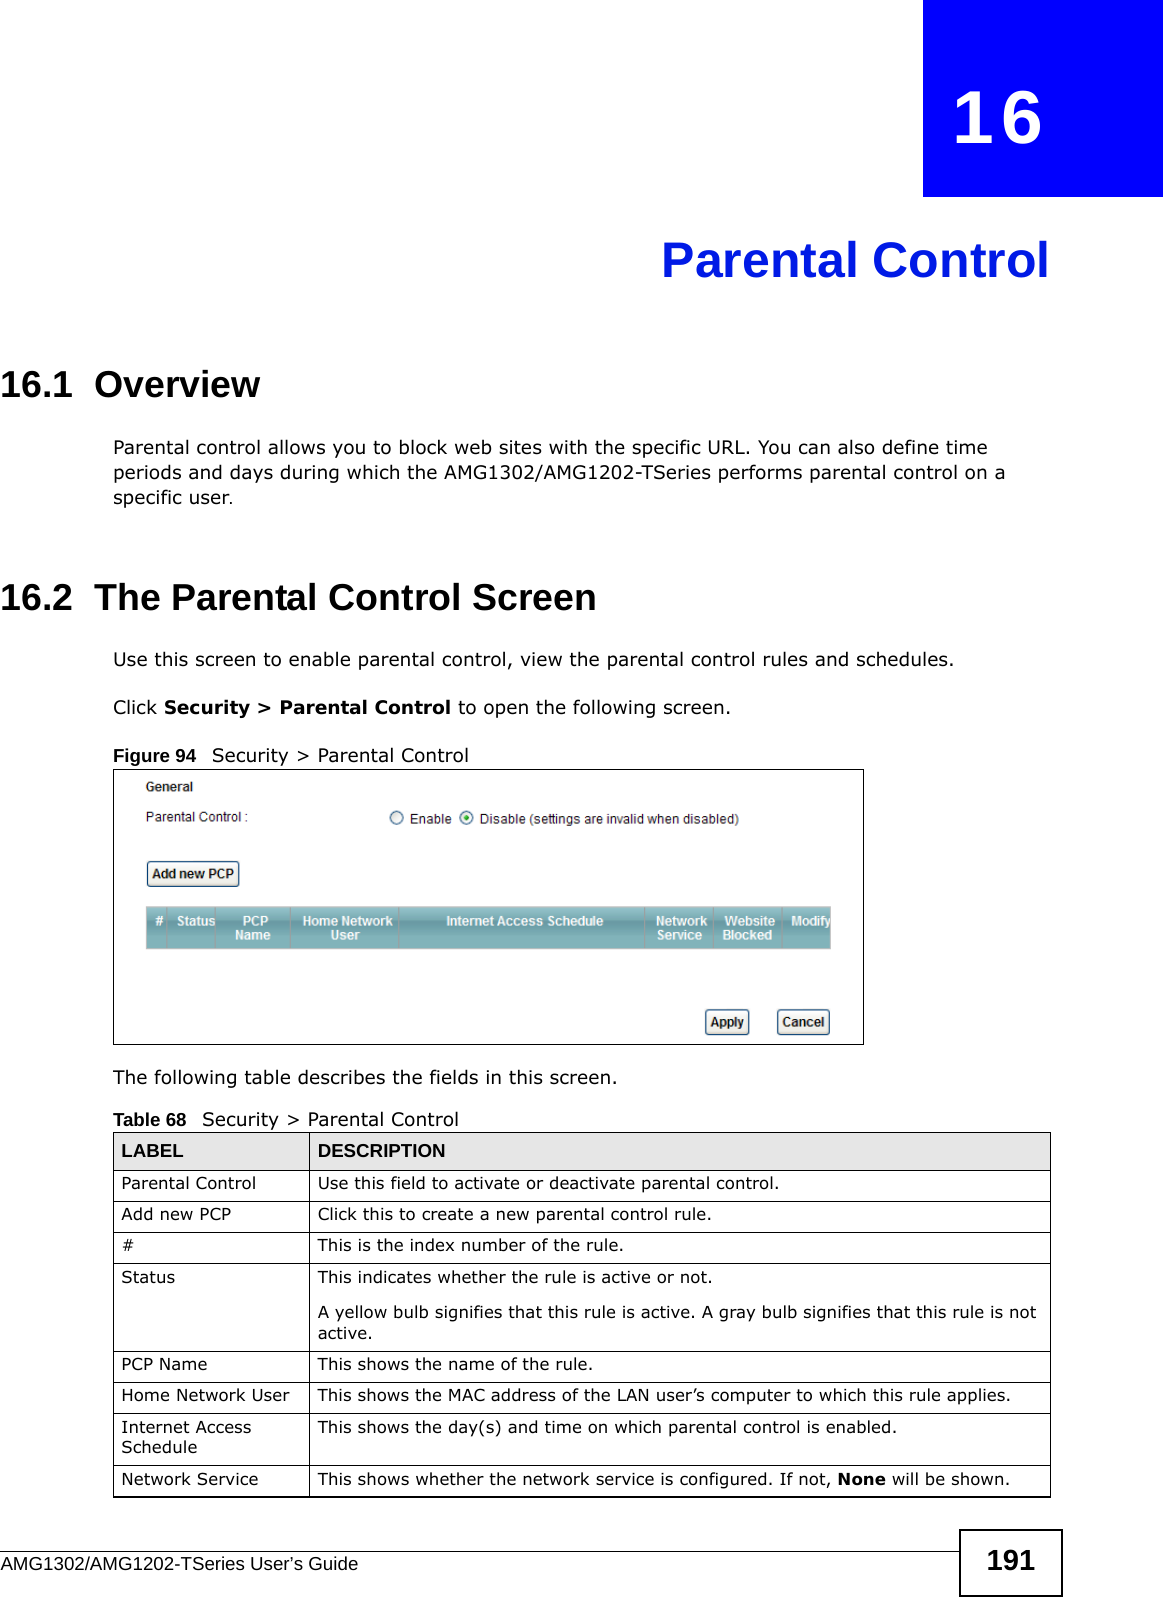 AMG1302/AMG1202-TSeries User’s Guide 191CHAPTER   16Parental Control16.1  OverviewParental control allows you to block web sites with the specific URL. You can also define time periods and days during which the AMG1302/AMG1202-TSeries performs parental control on a specific user.16.2  The Parental Control ScreenUse this screen to enable parental control, view the parental control rules and schedules.Click Security &gt; Parental Control to open the following screen. Figure 94   Security &gt; Parental Control  The following table describes the fields in this screen. Table 68   Security &gt; Parental ControlLABEL DESCRIPTIONParental Control Use this field to activate or deactivate parental control.Add new PCP Click this to create a new parental control rule.# This is the index number of the rule.Status This indicates whether the rule is active or not.A yellow bulb signifies that this rule is active. A gray bulb signifies that this rule is not active.PCP Name This shows the name of the rule.Home Network User This shows the MAC address of the LAN user’s computer to which this rule applies.Internet Access ScheduleThis shows the day(s) and time on which parental control is enabled.Network Service This shows whether the network service is configured. If not, None will be shown.